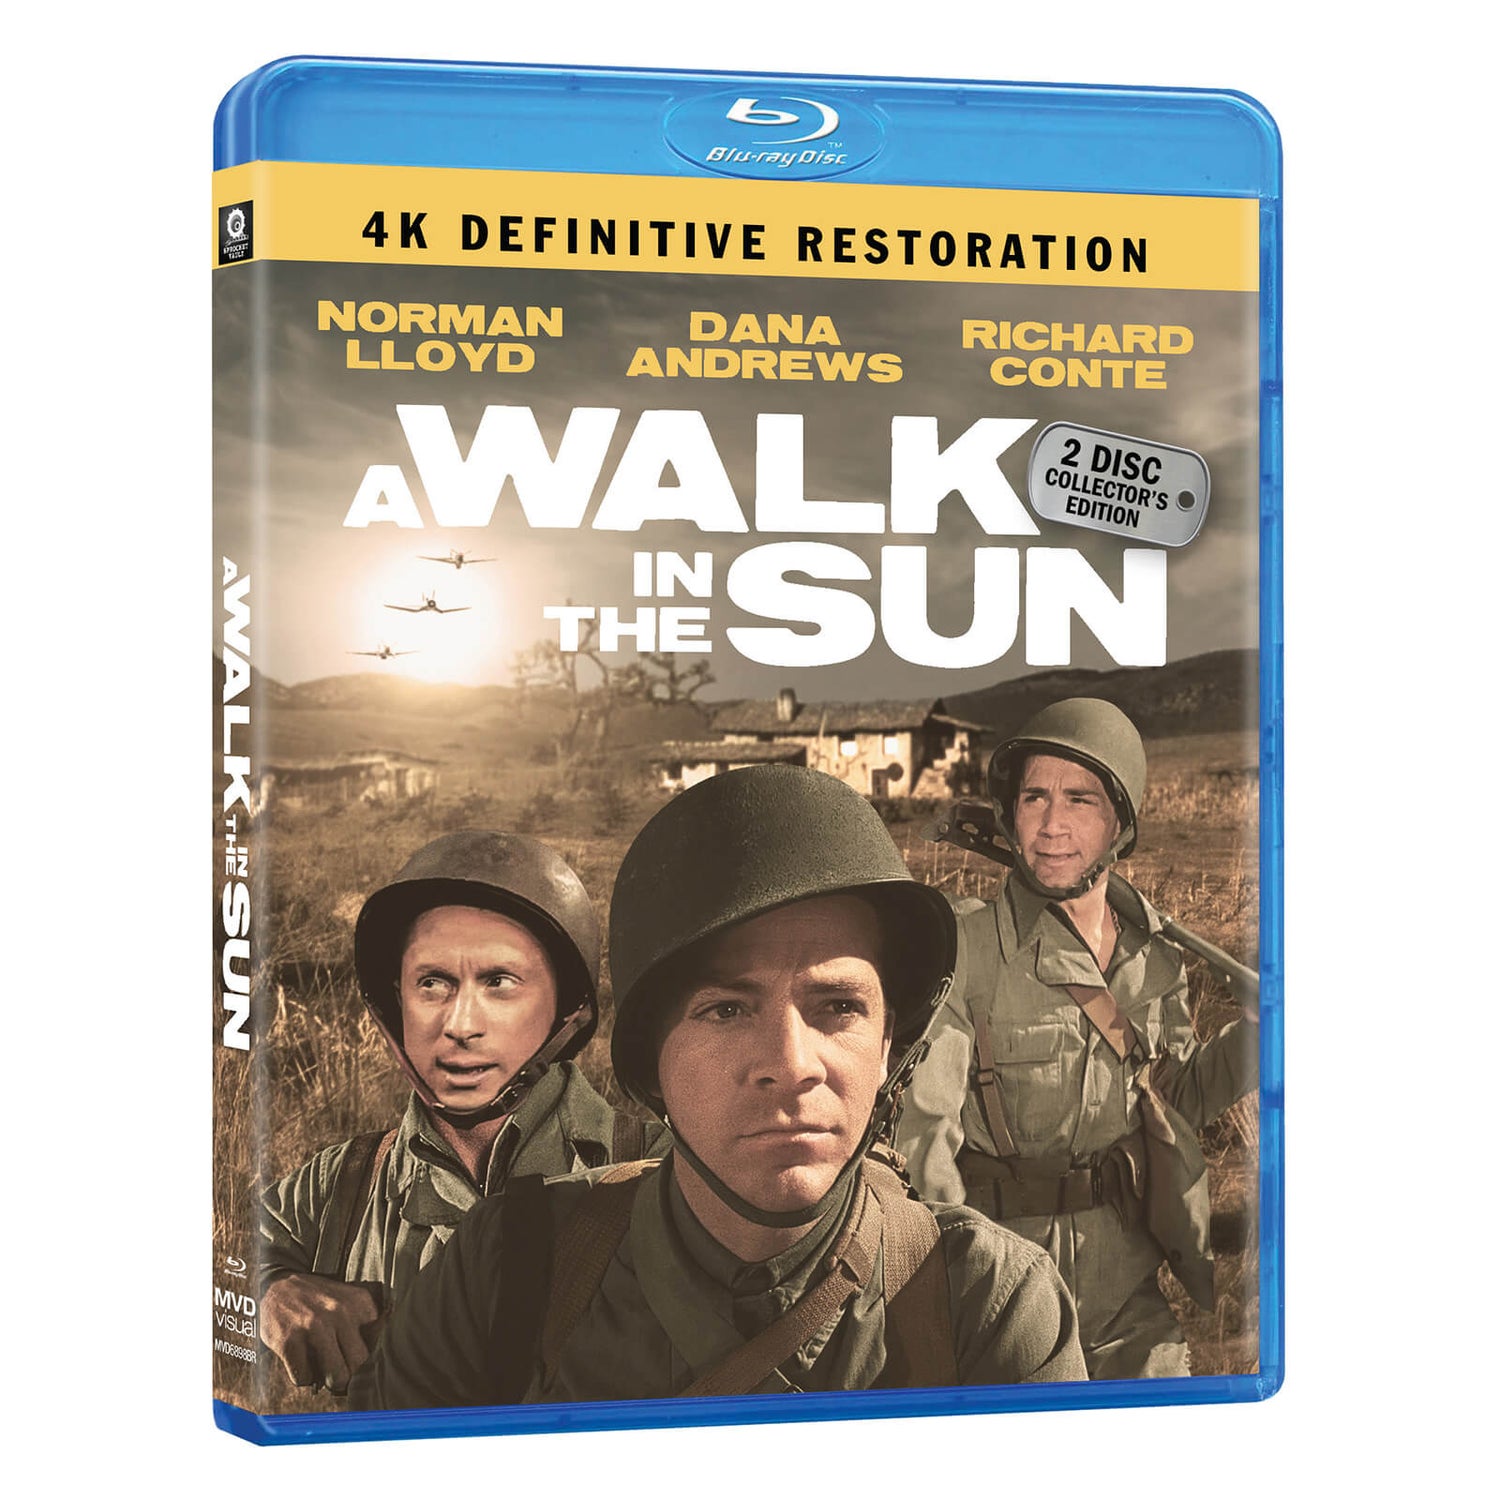 A Walk In The Sun: The Definitive Restoration (US Import)